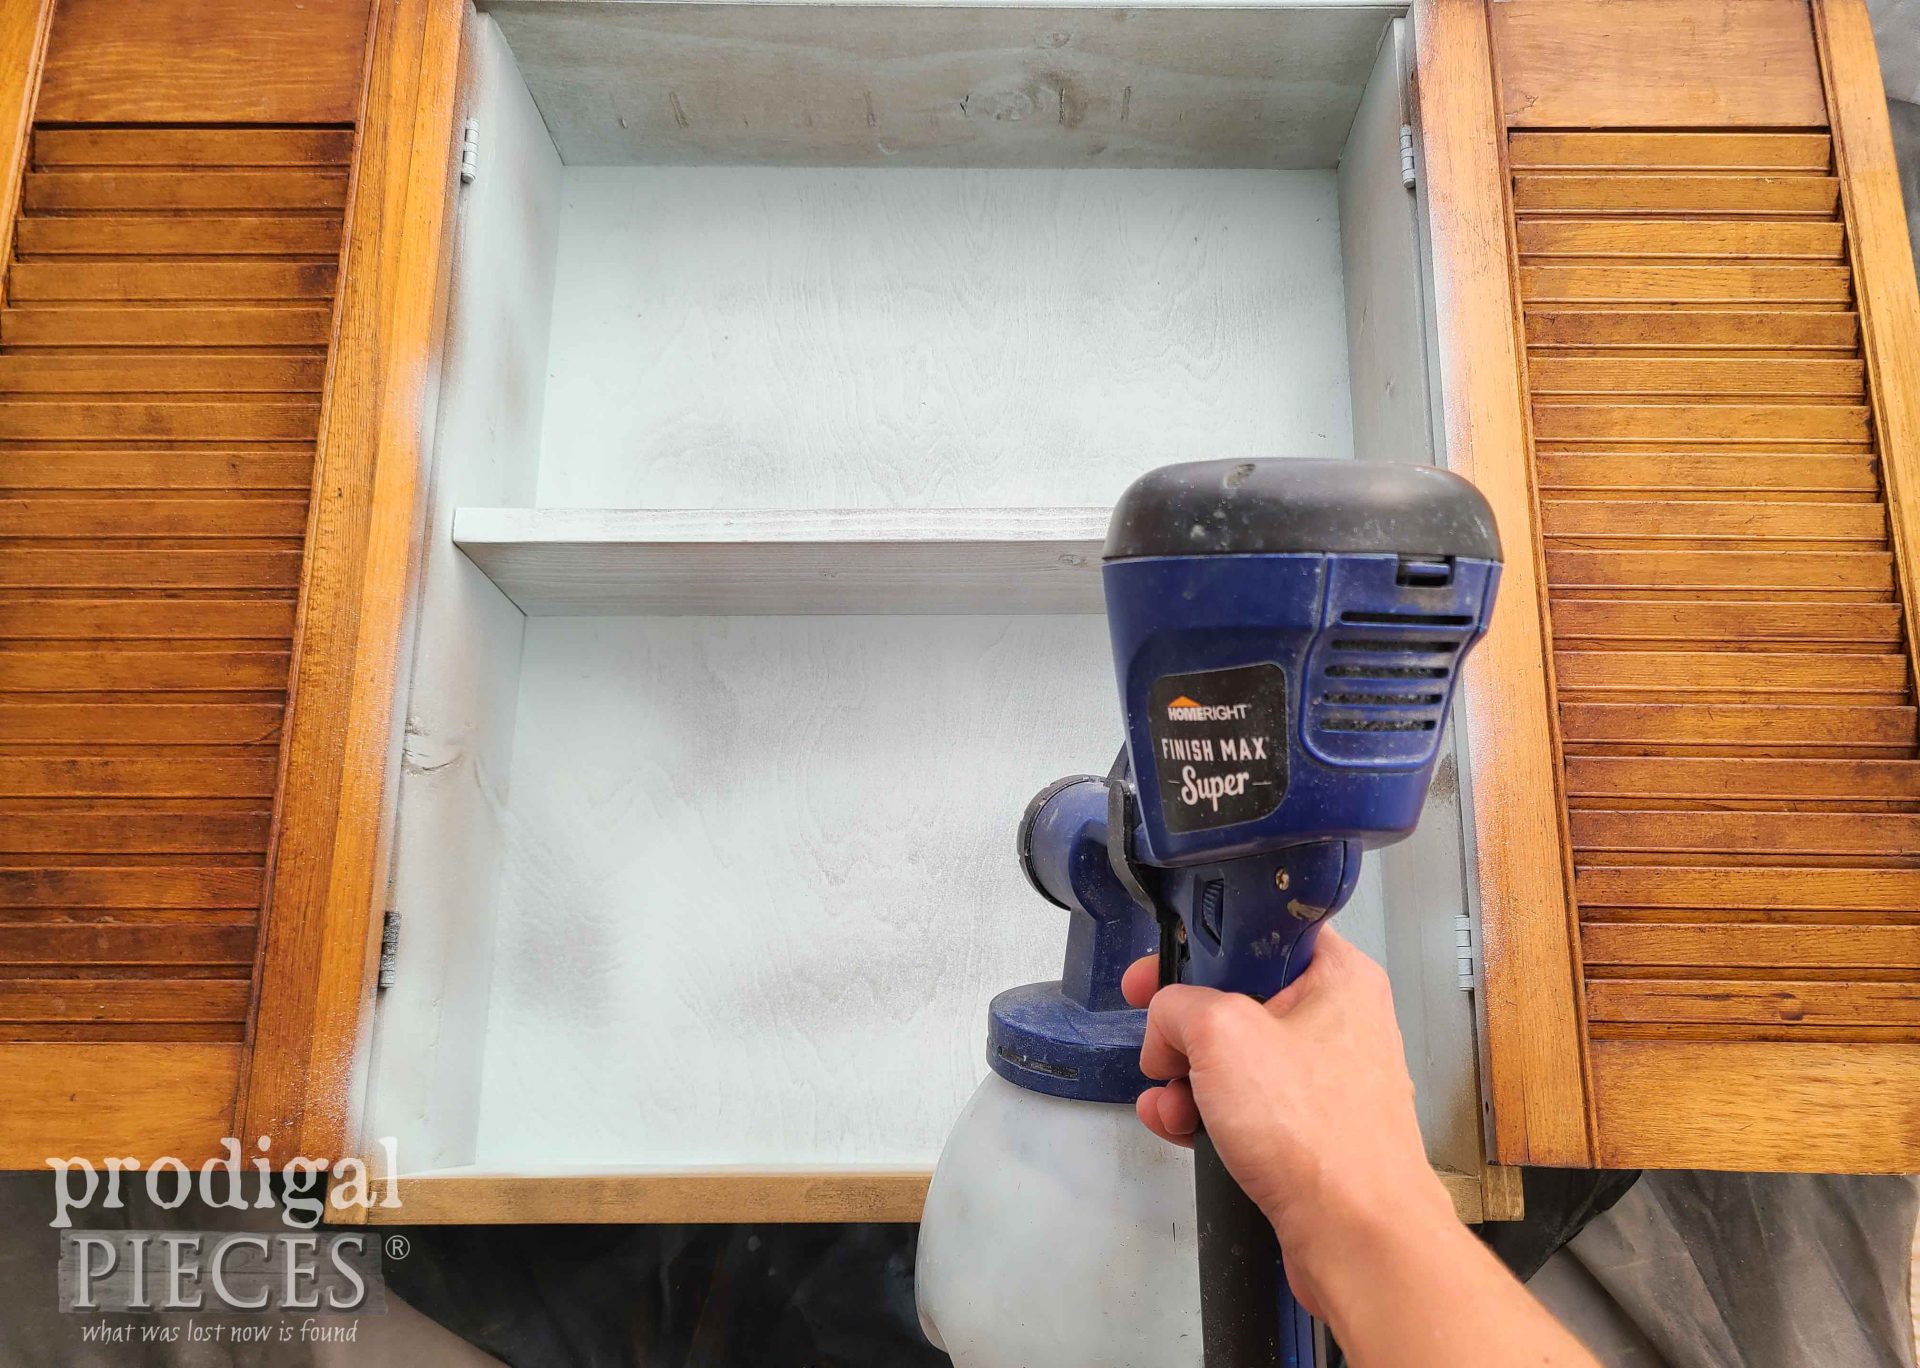 Spray Painting Upcycled Shutters Wall Cabinet with HomeRight Super Finish Max Extra Sprayer by Larissa of Prodigal Pieces | prodigalpieces.com #prodigalpieces #diy #paint